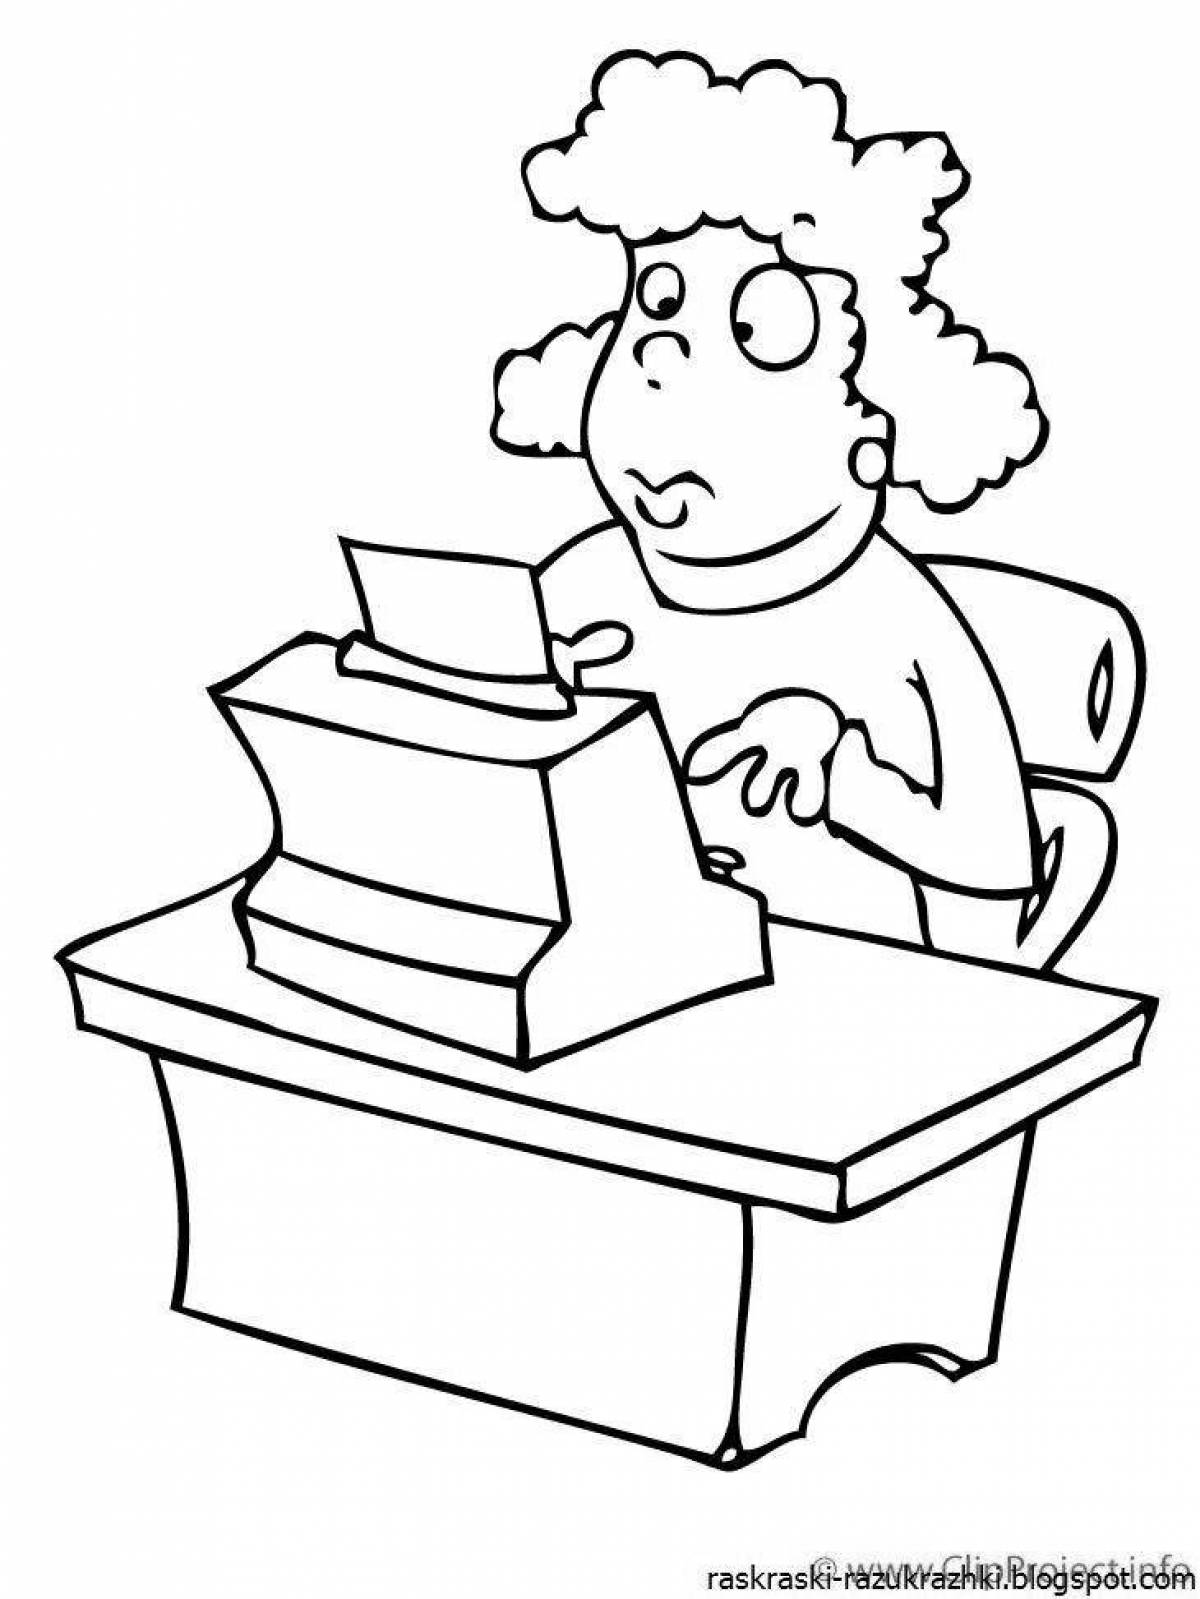 Accountant's funny coloring book